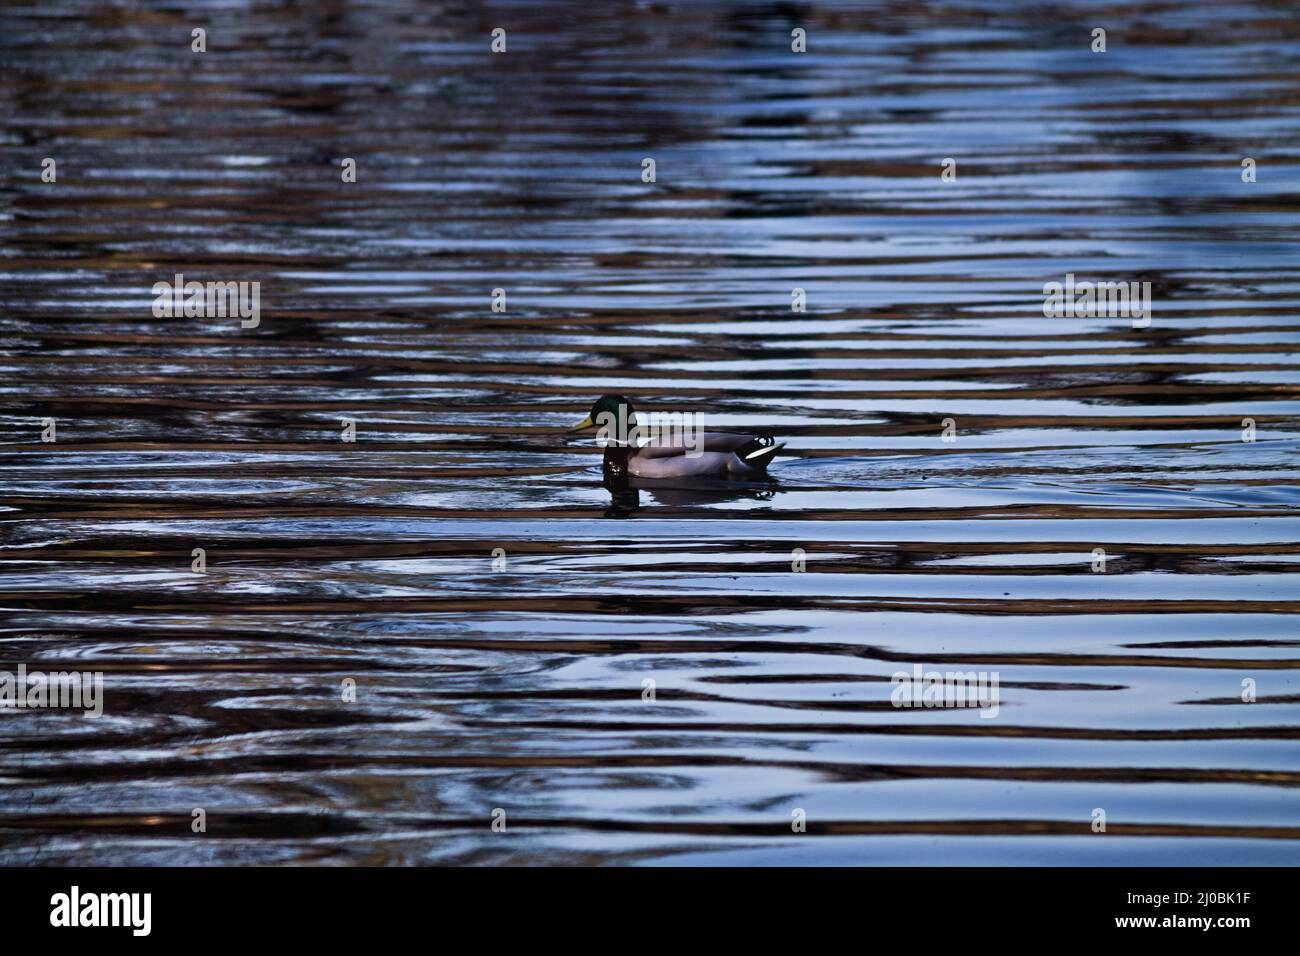 Mallard duck in a pond with contrasting waves Stock Photo